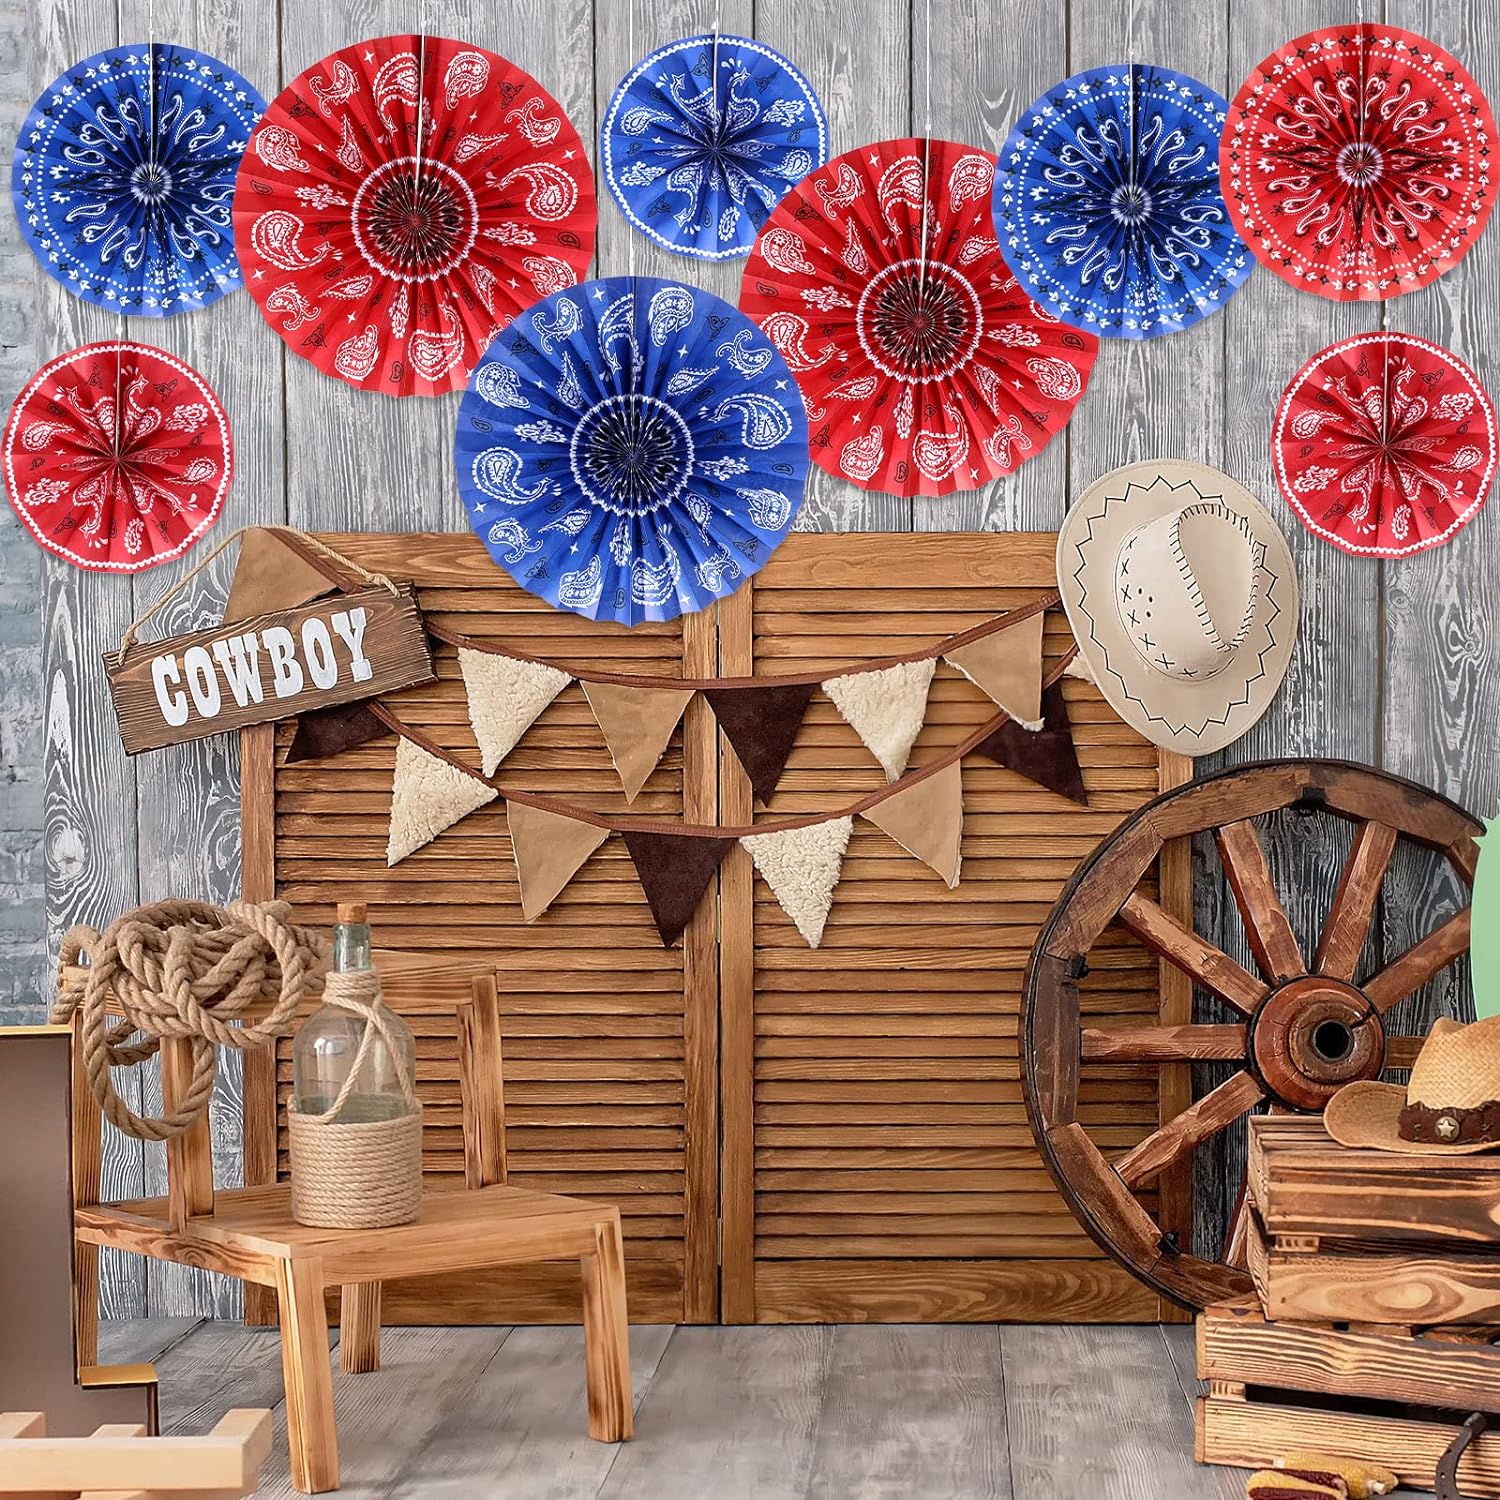 Bulk 18 Pcs Wild West Bandana Paper Fans Western Themed Decor for Parties and Classroom Displays Wholesale